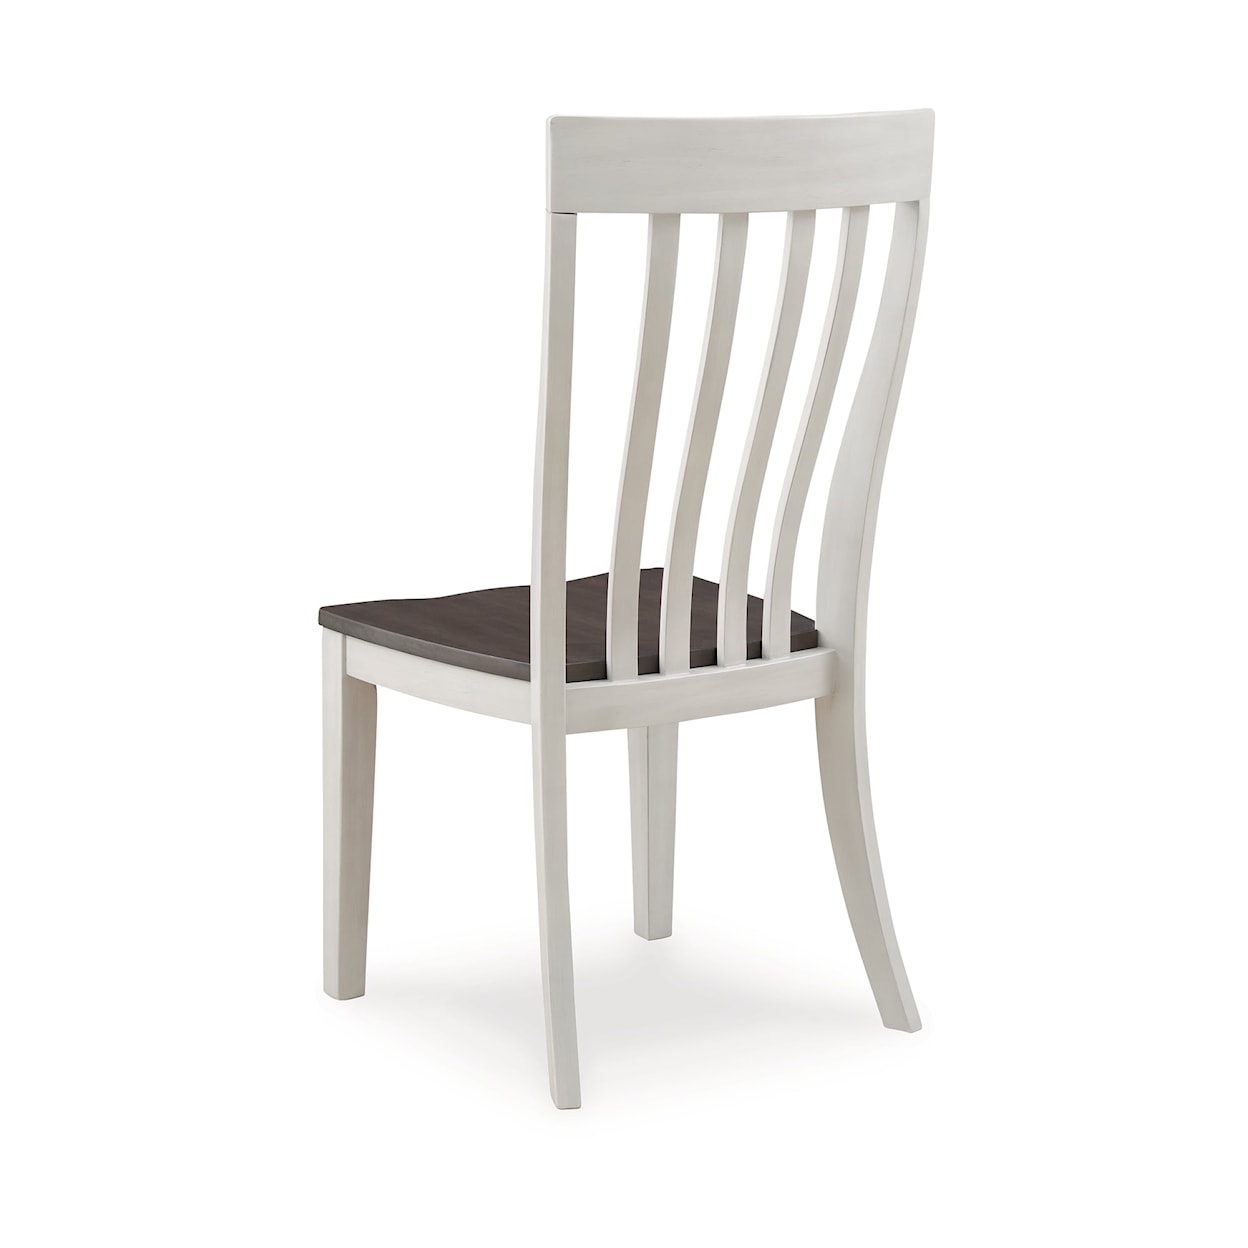 Benchcraft Darborn Dining Room Side Chair